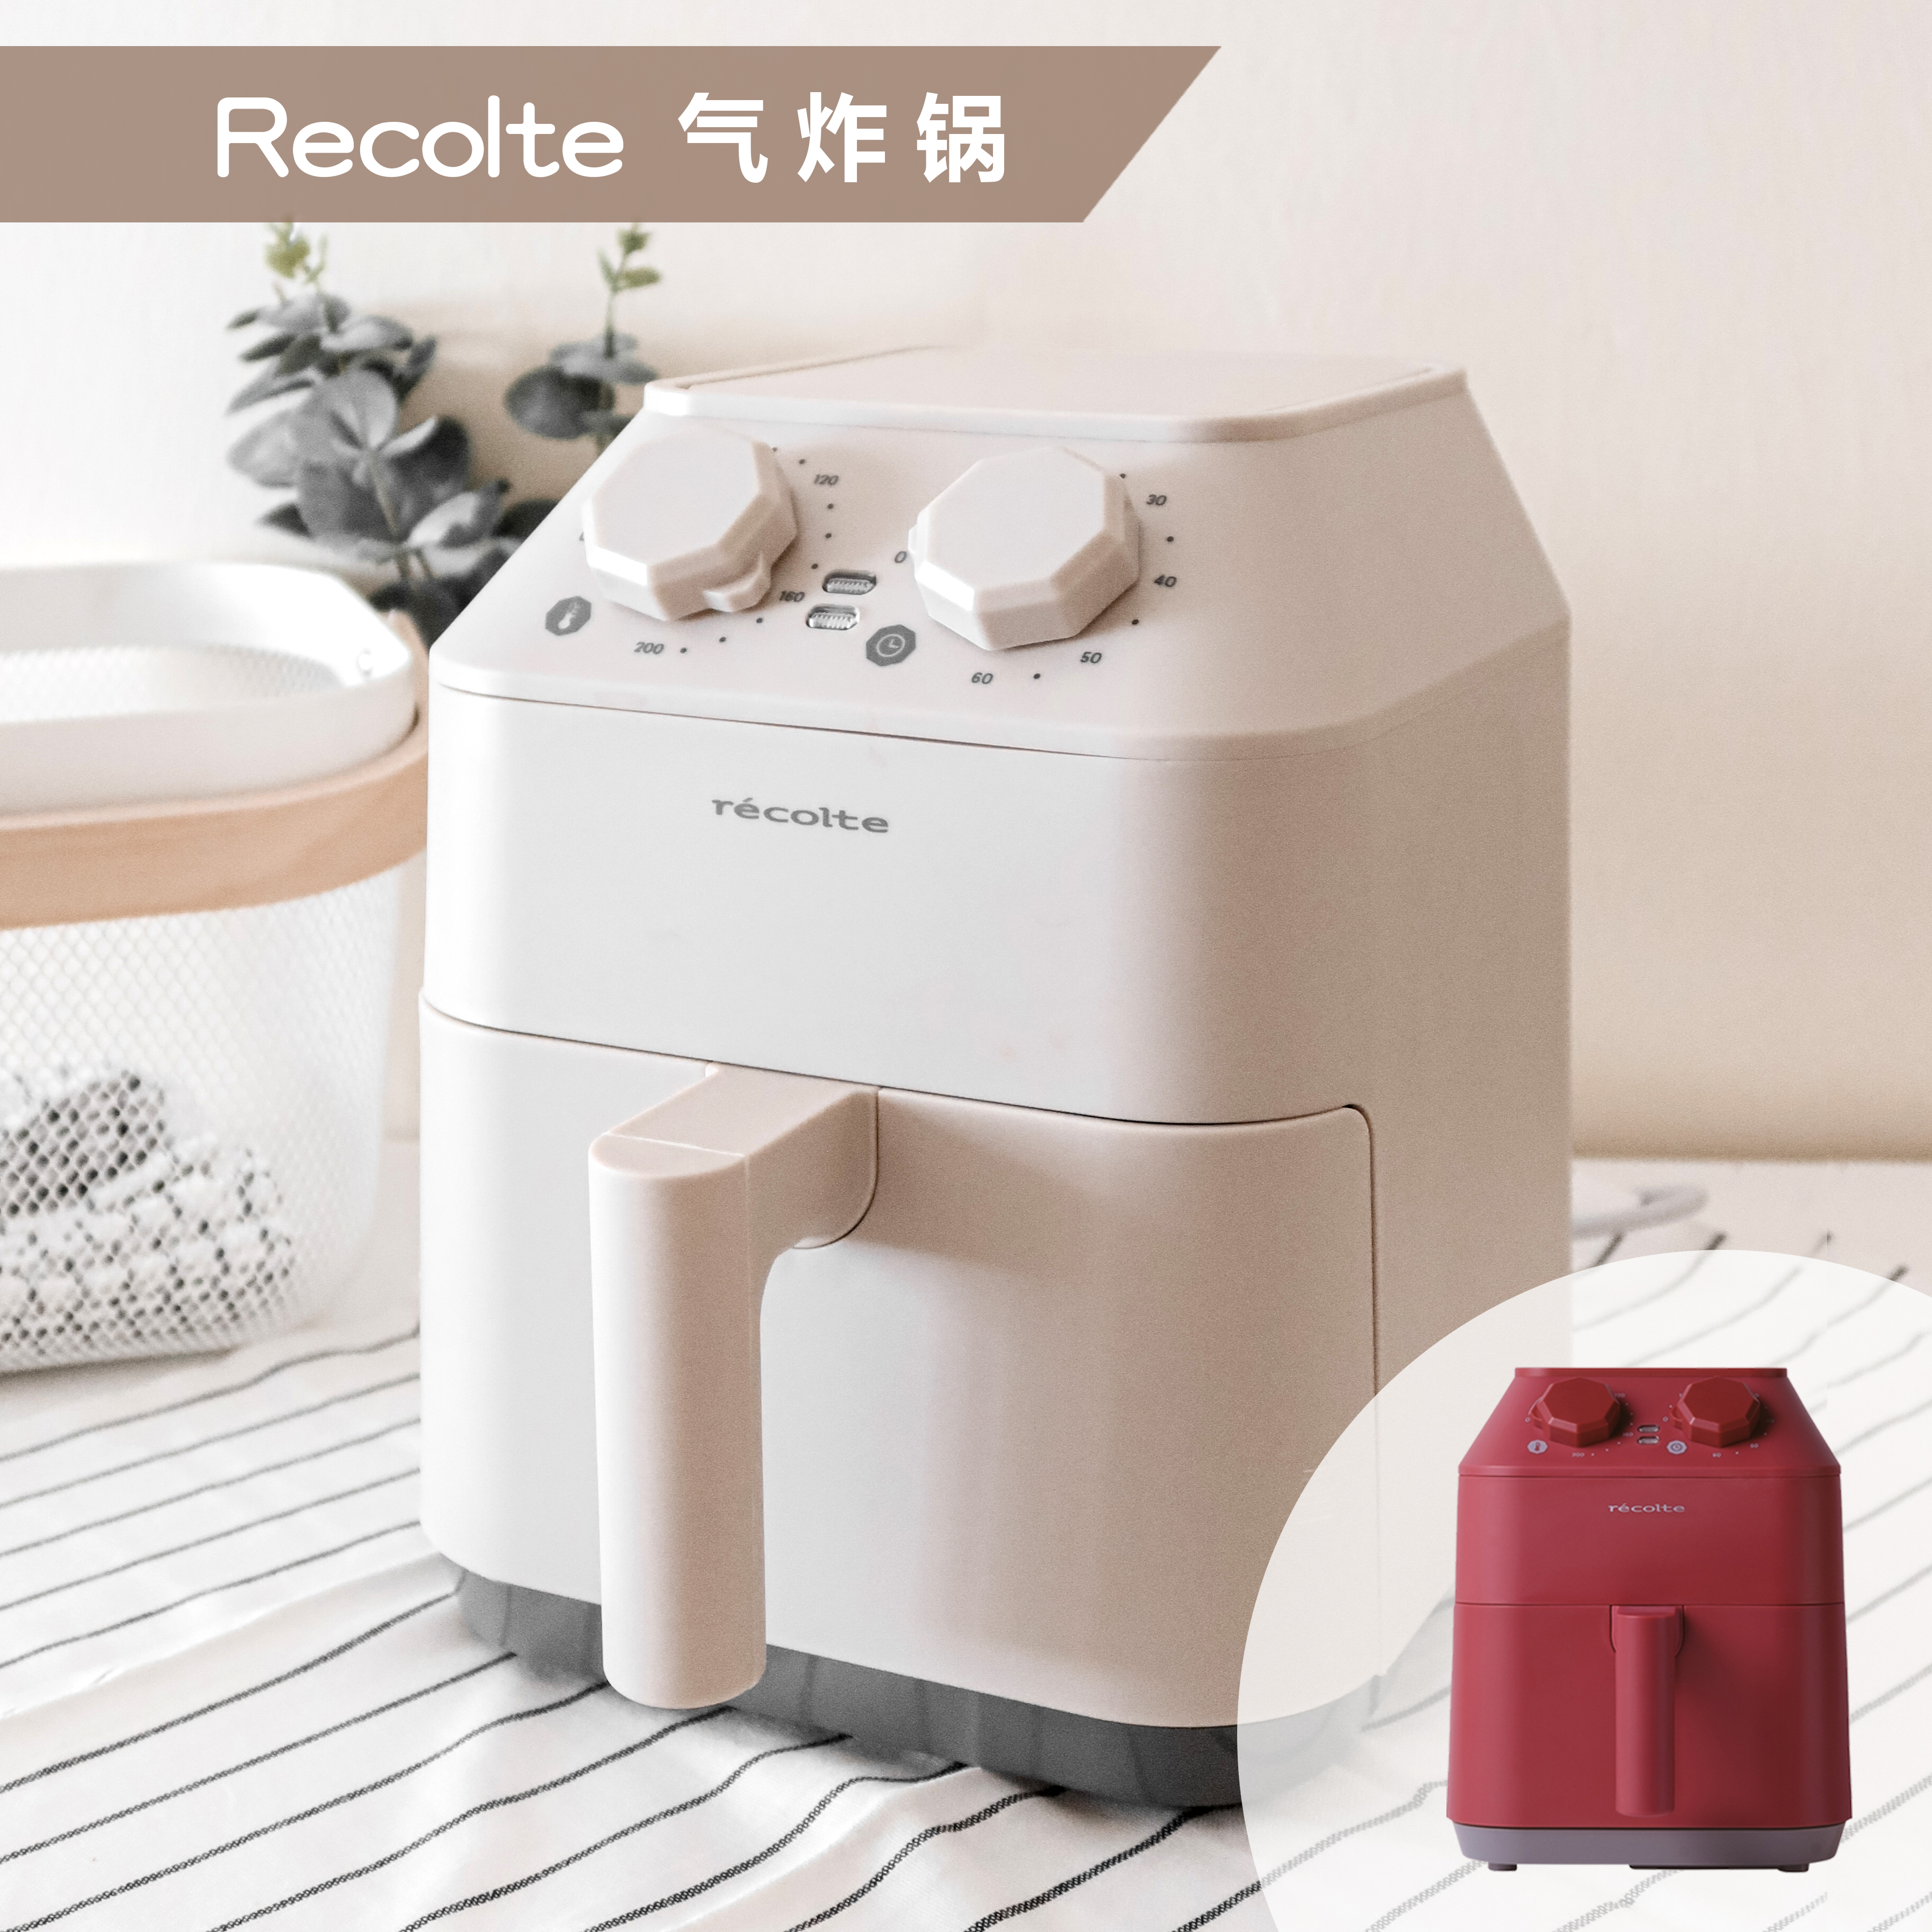 recolte air oven cover.jpg